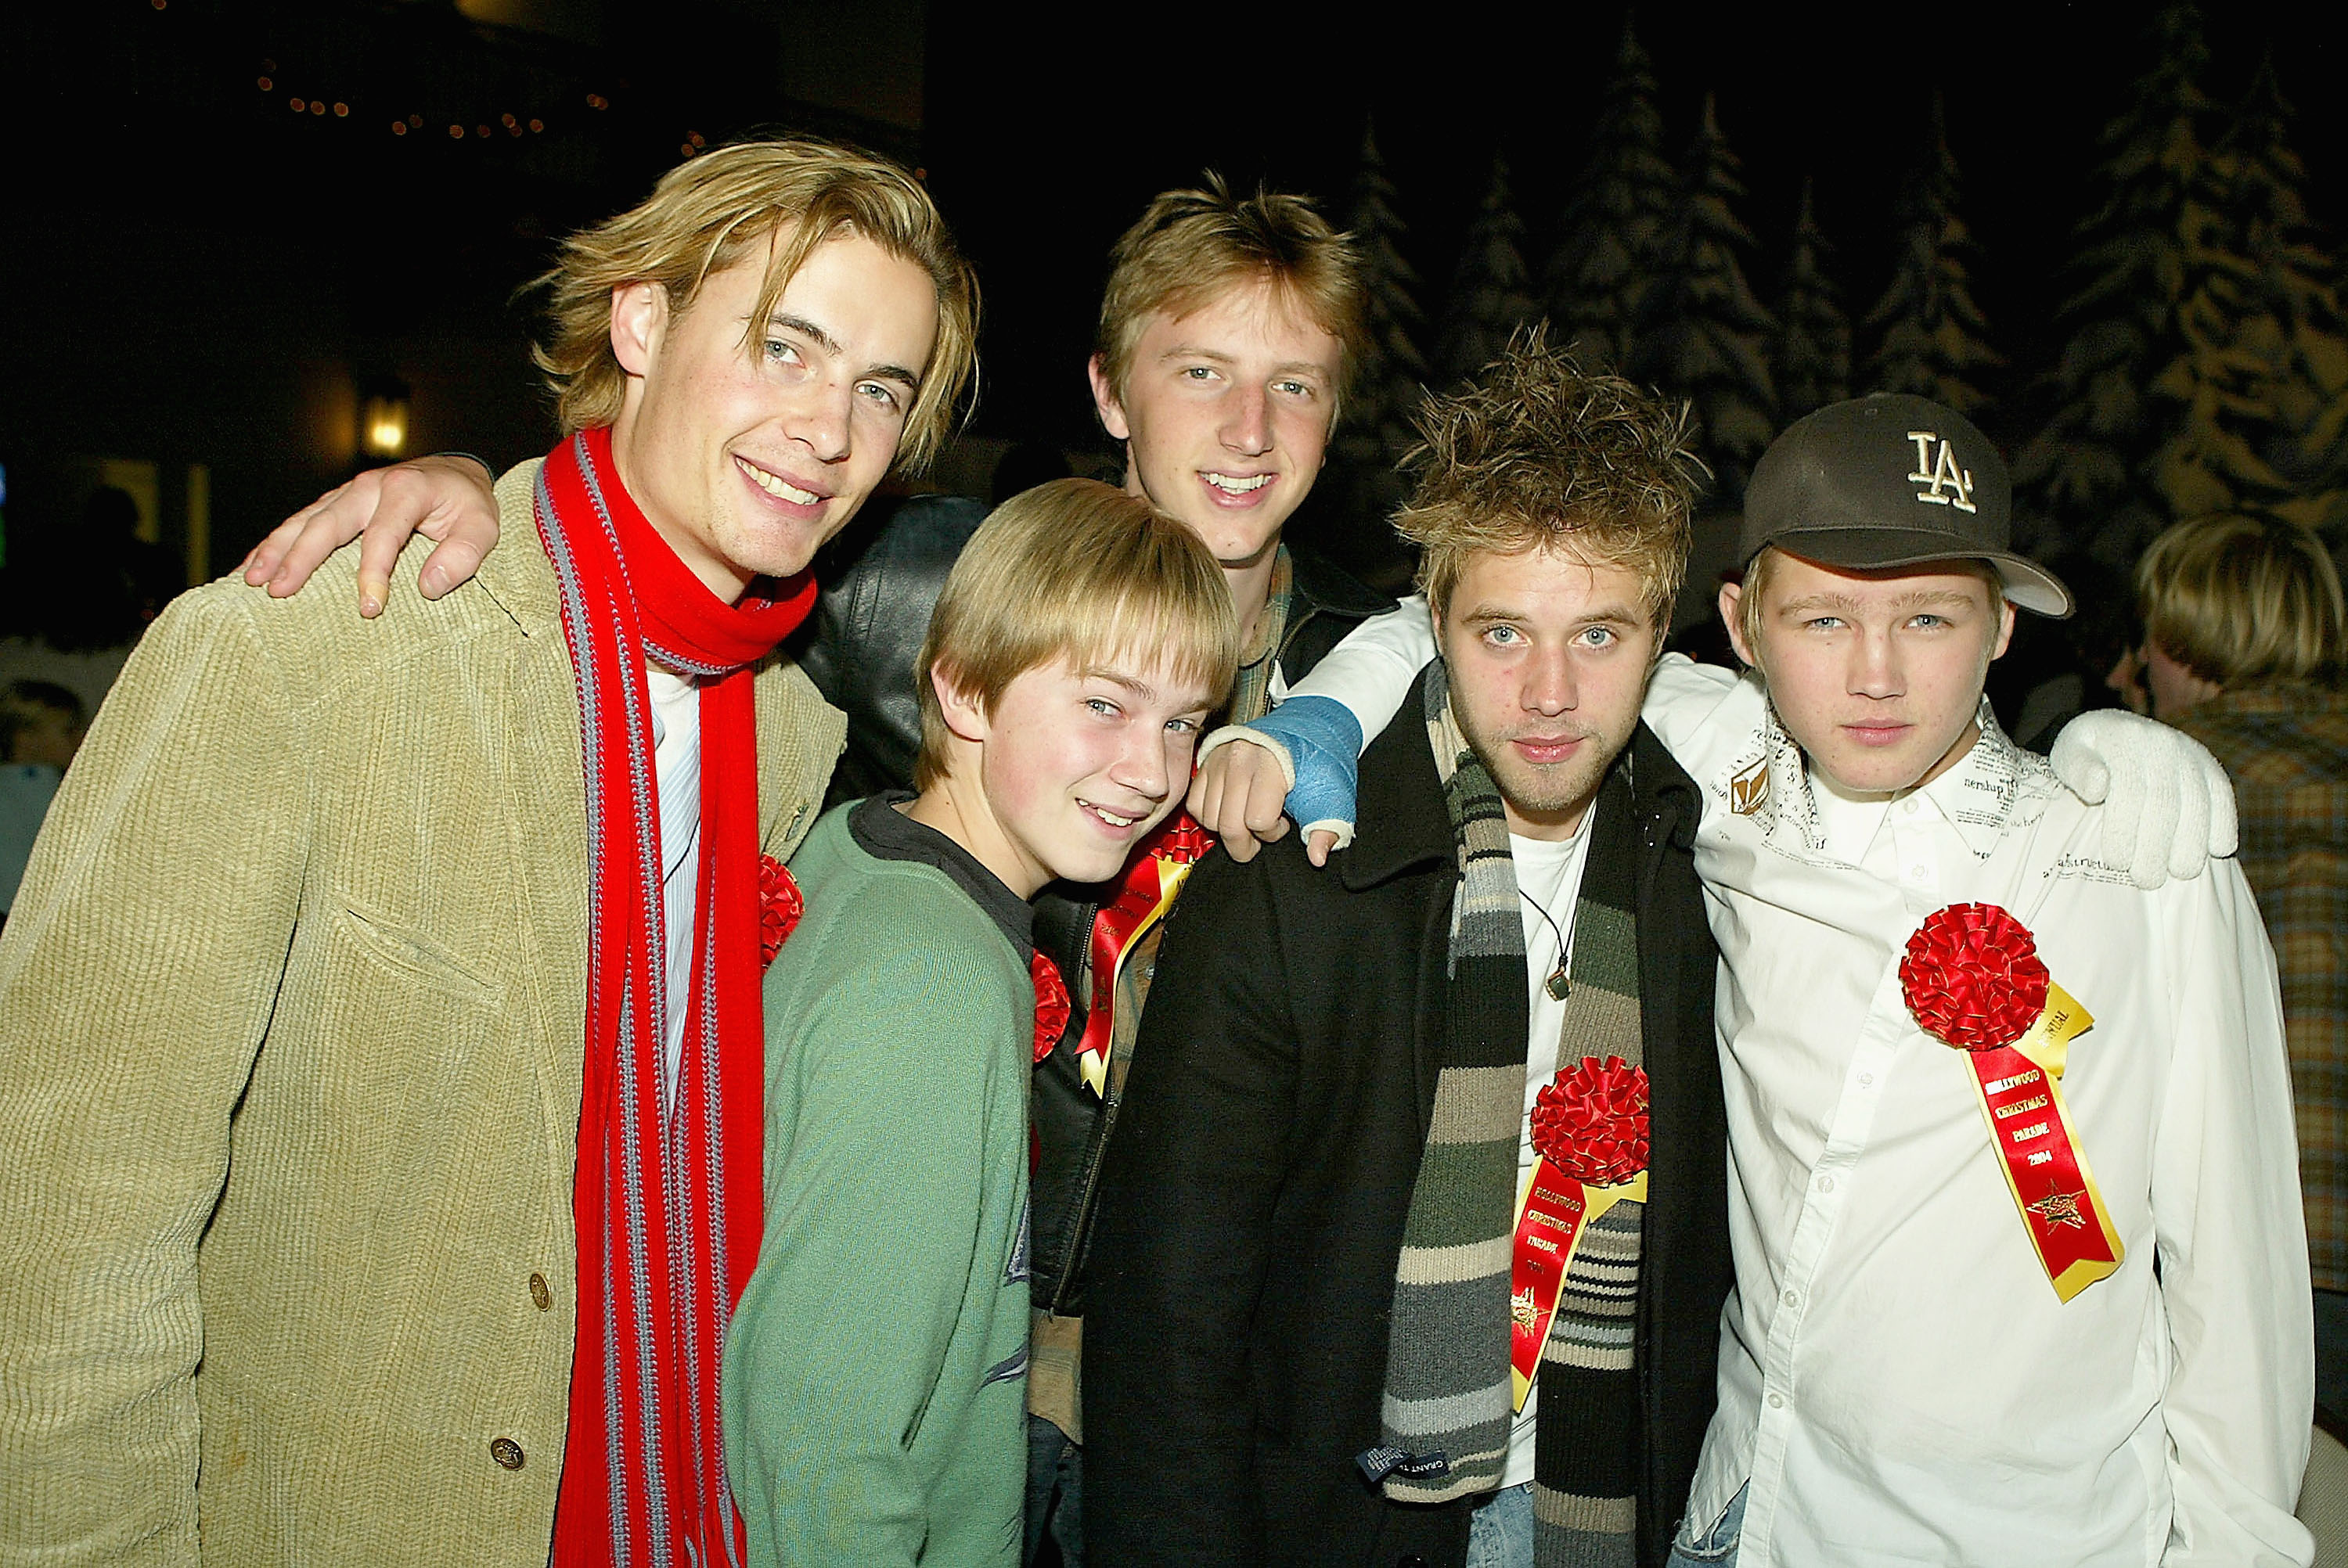 Erik von Detten, Jason Dolley, Andrew Eiden, Shaun Sipos, and Evan Ellingson at the 73rd Annual Hollywood Christmas Parade in Hollywood, California, on November 28, 2004. | Source: Getty Images